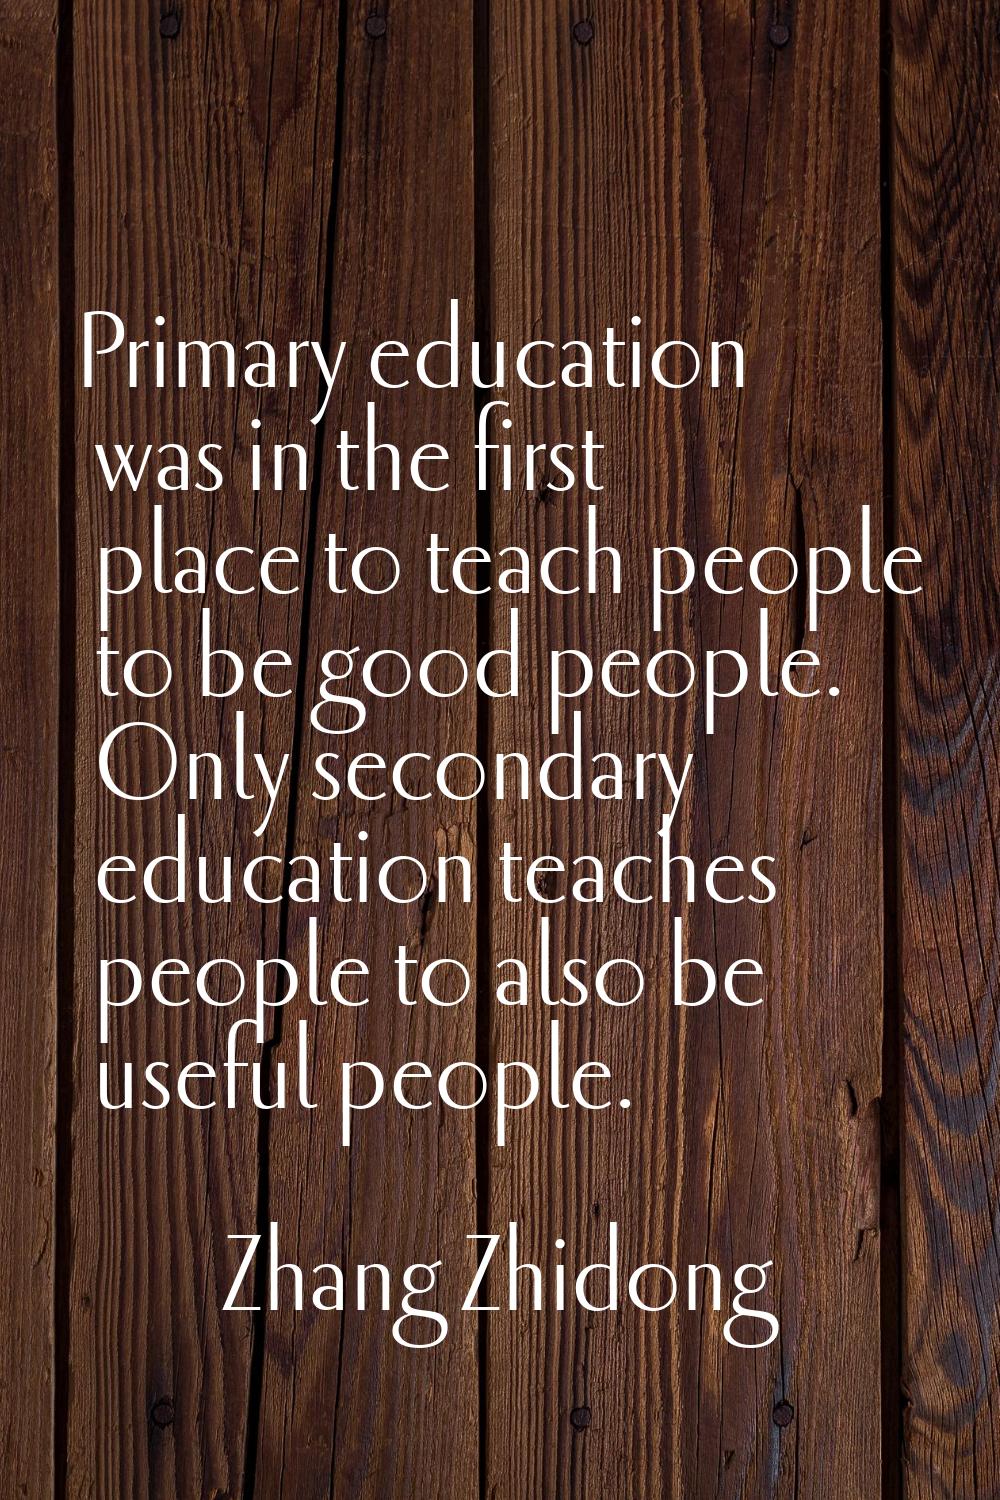 Primary education was in the first place to teach people to be good people. Only secondary educatio